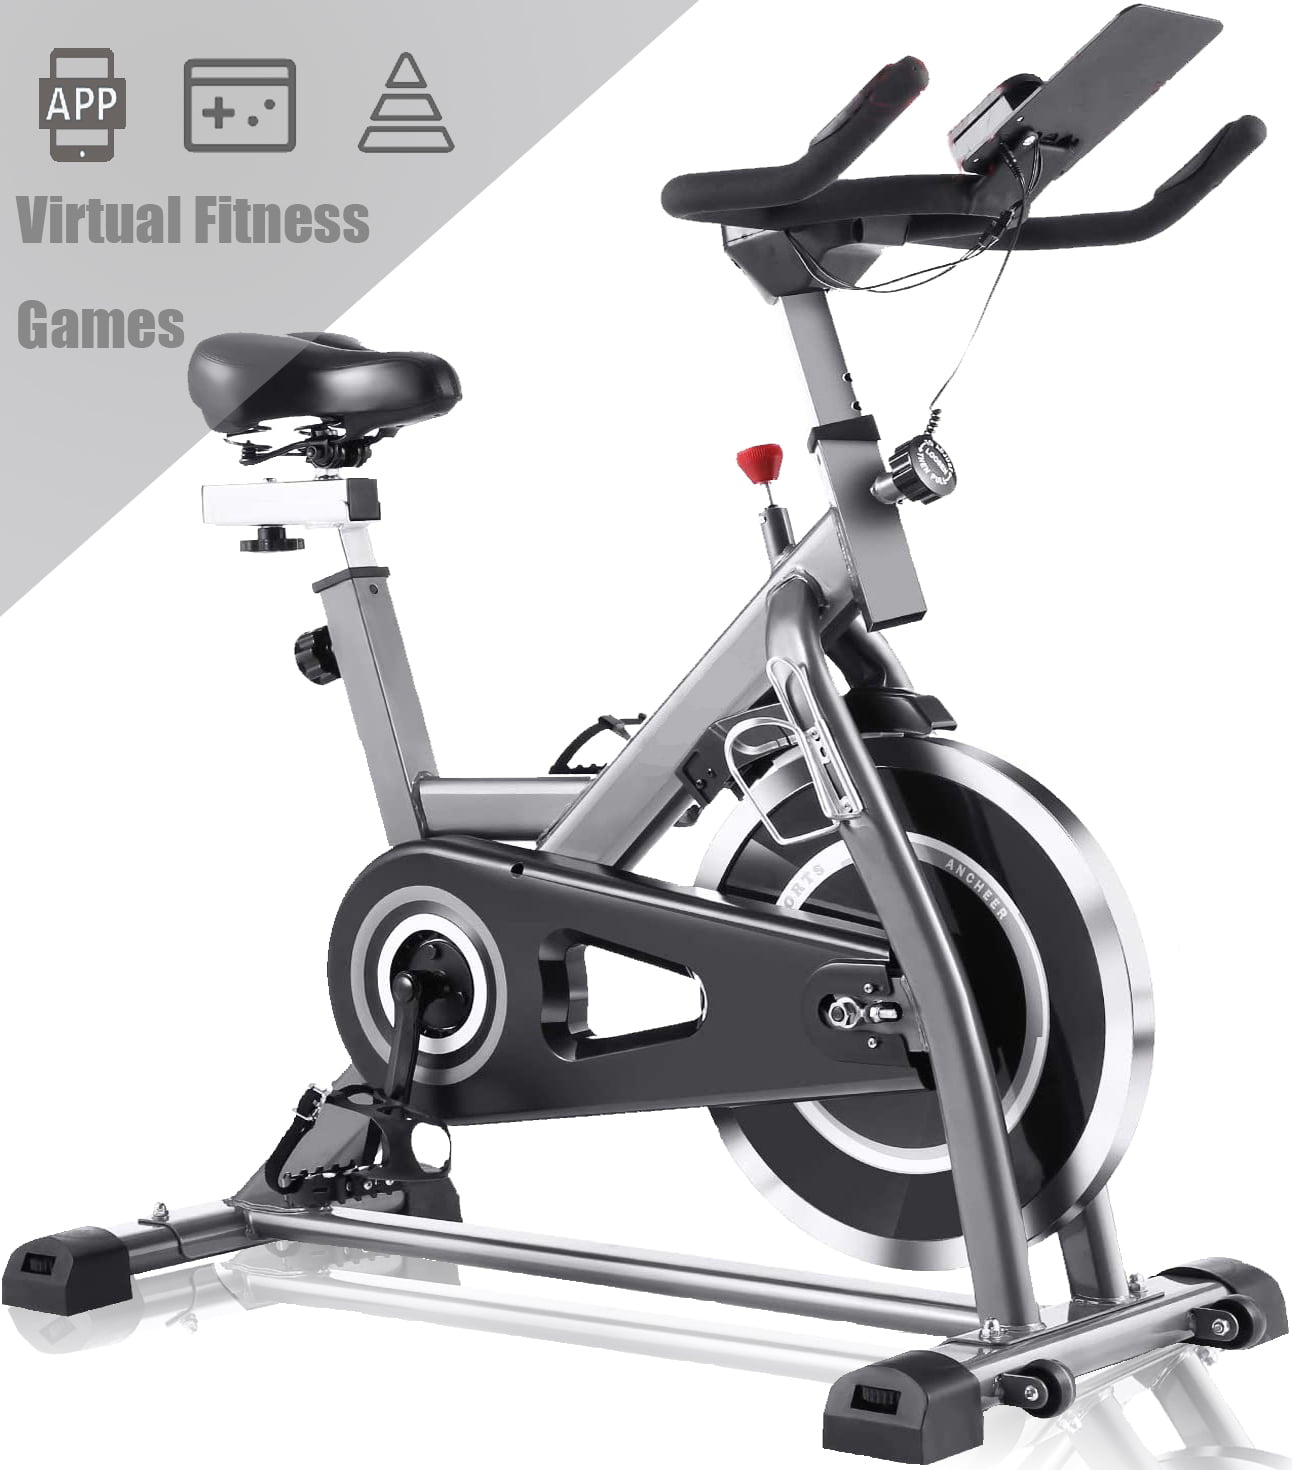 Home Exercise Bike Spinning Fitness Bike Fitness Cardio Workout Machine white